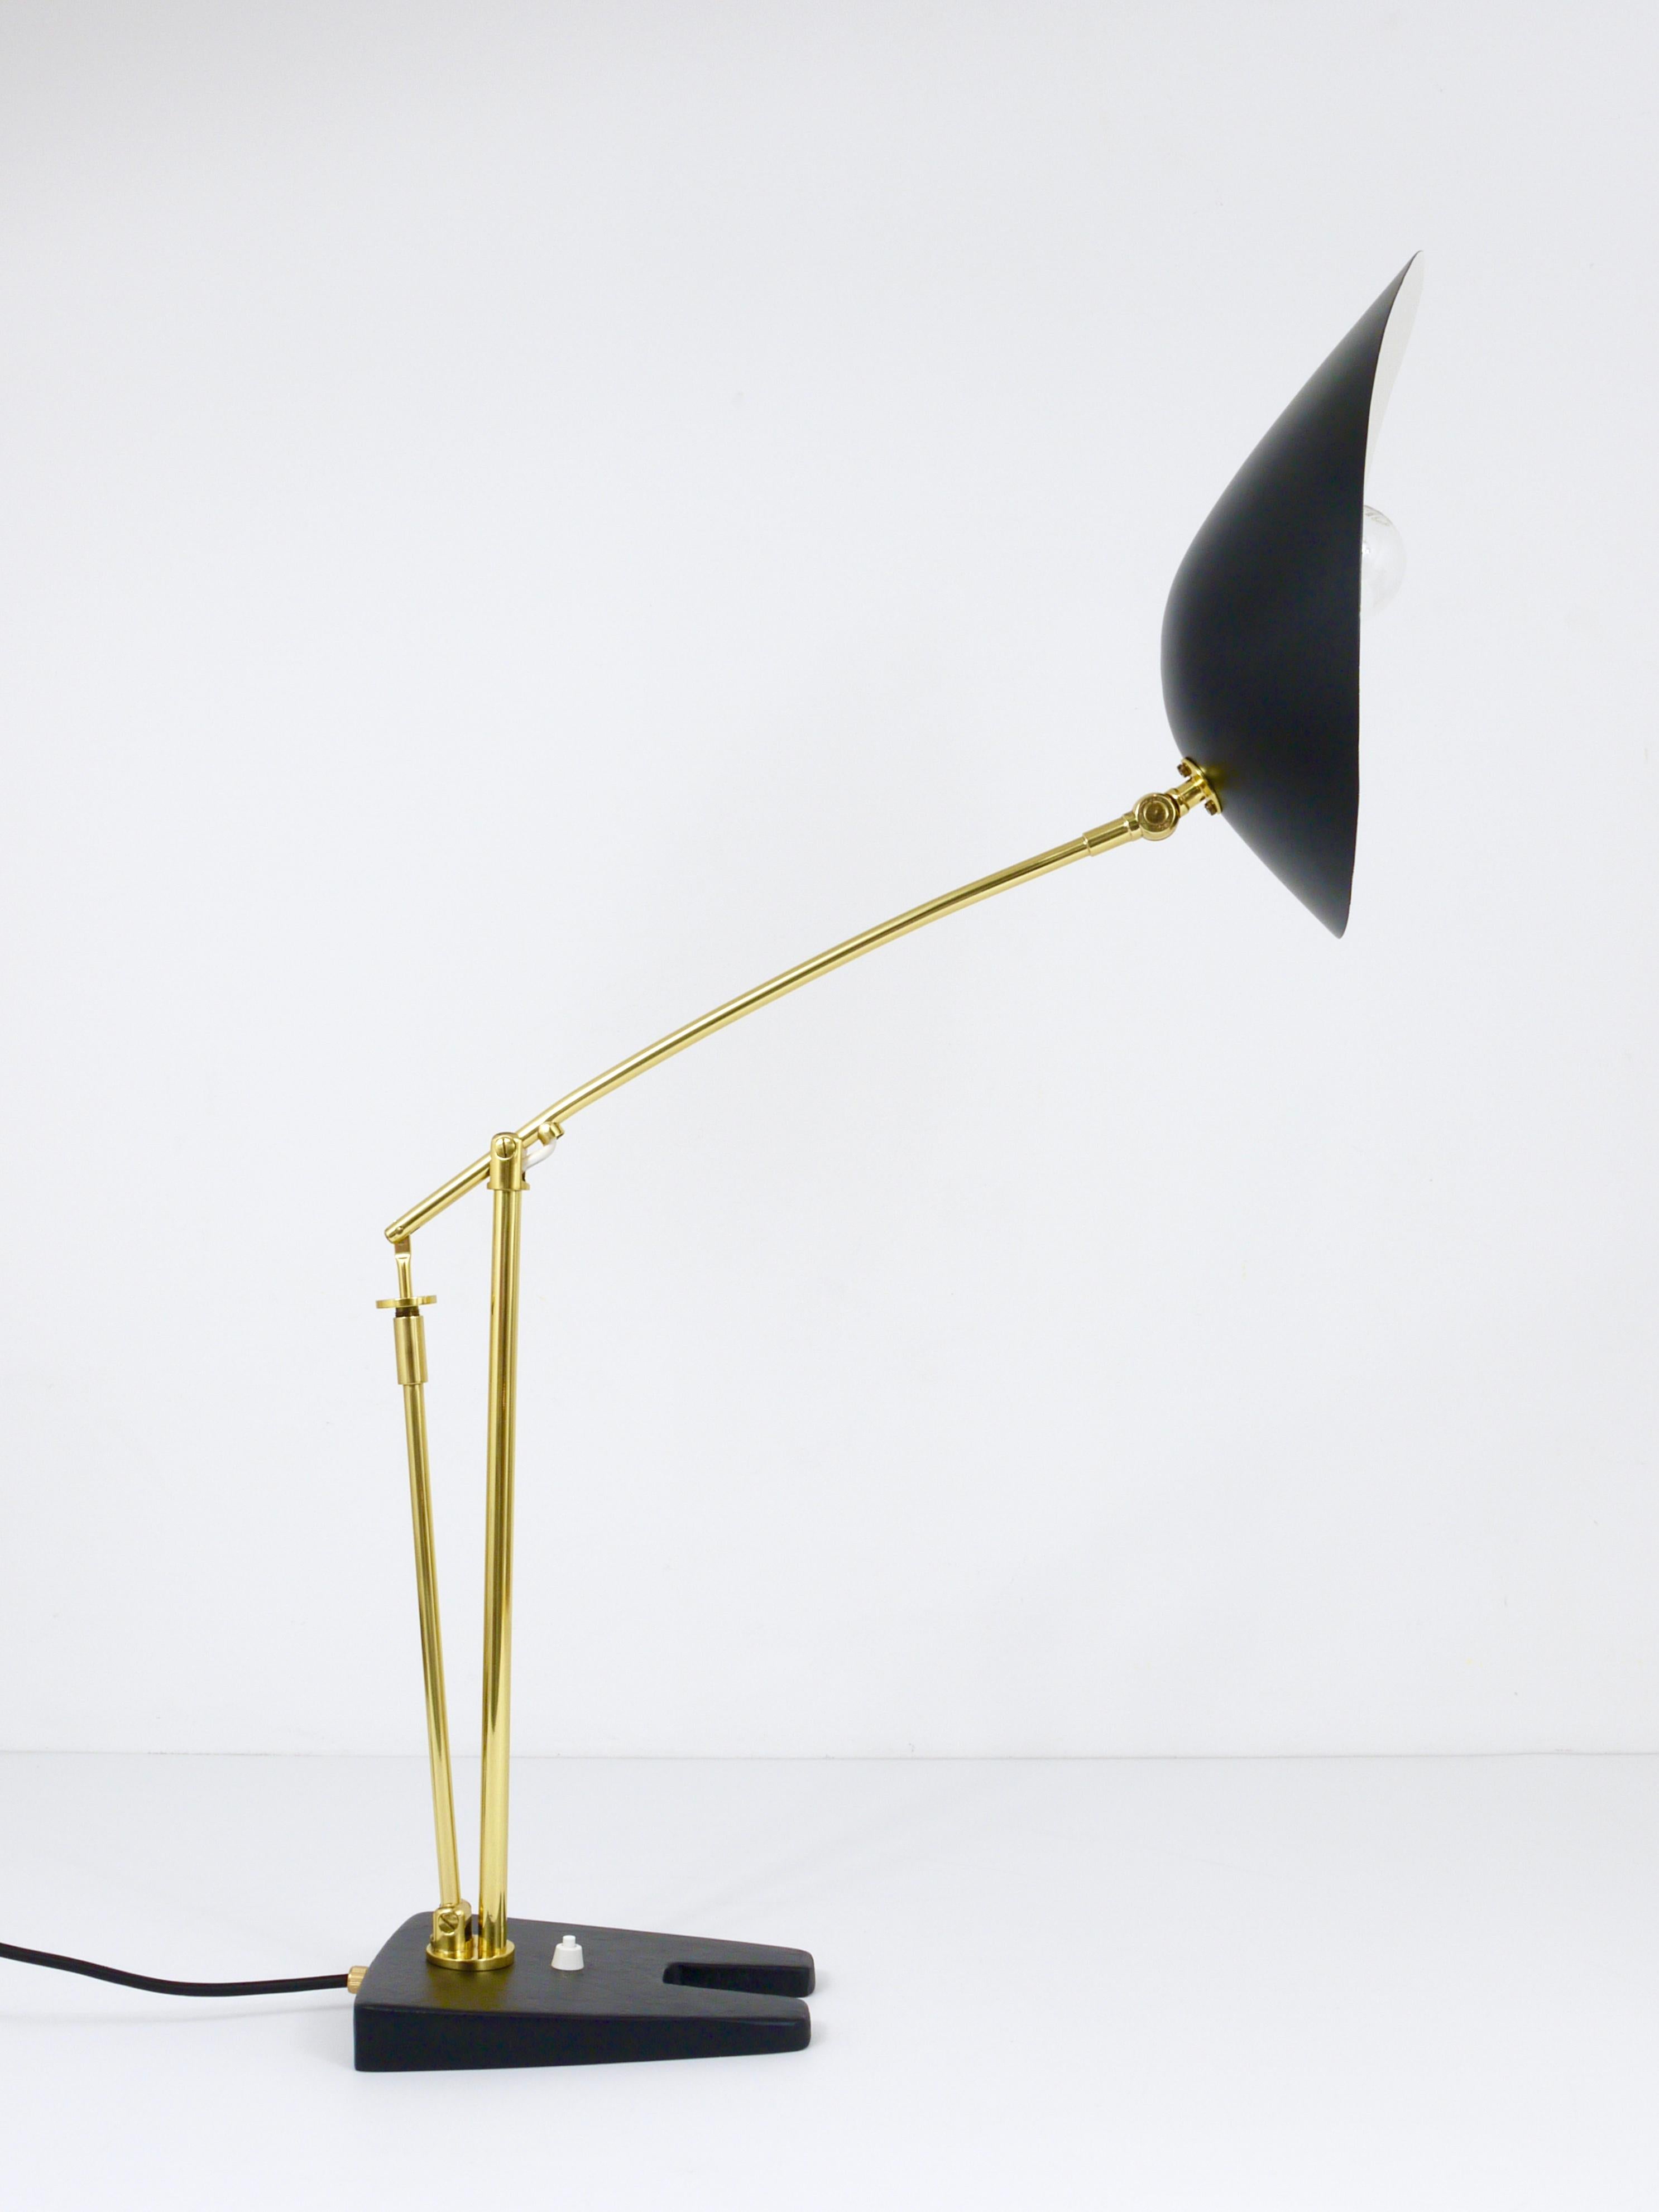 A French articulating height adjustable brass table or desk lamp from the 1950s. This iconic light is made of brass and has an amazing adjusting system, a pivotable black lacquered aluminum lampshade and a solid cast iron base. The lamp has been